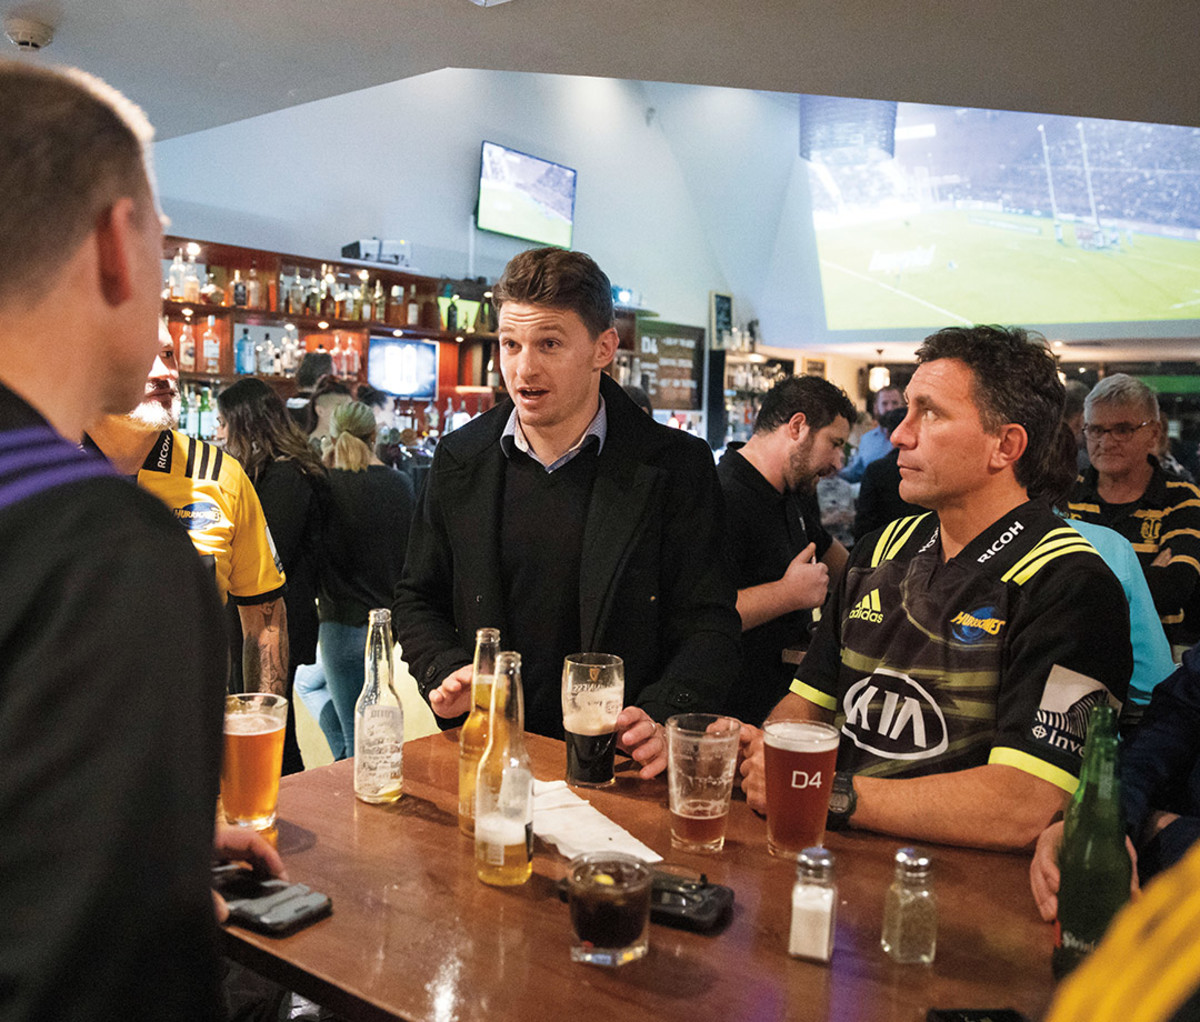 Drinking with fans at a pub in Wellington.